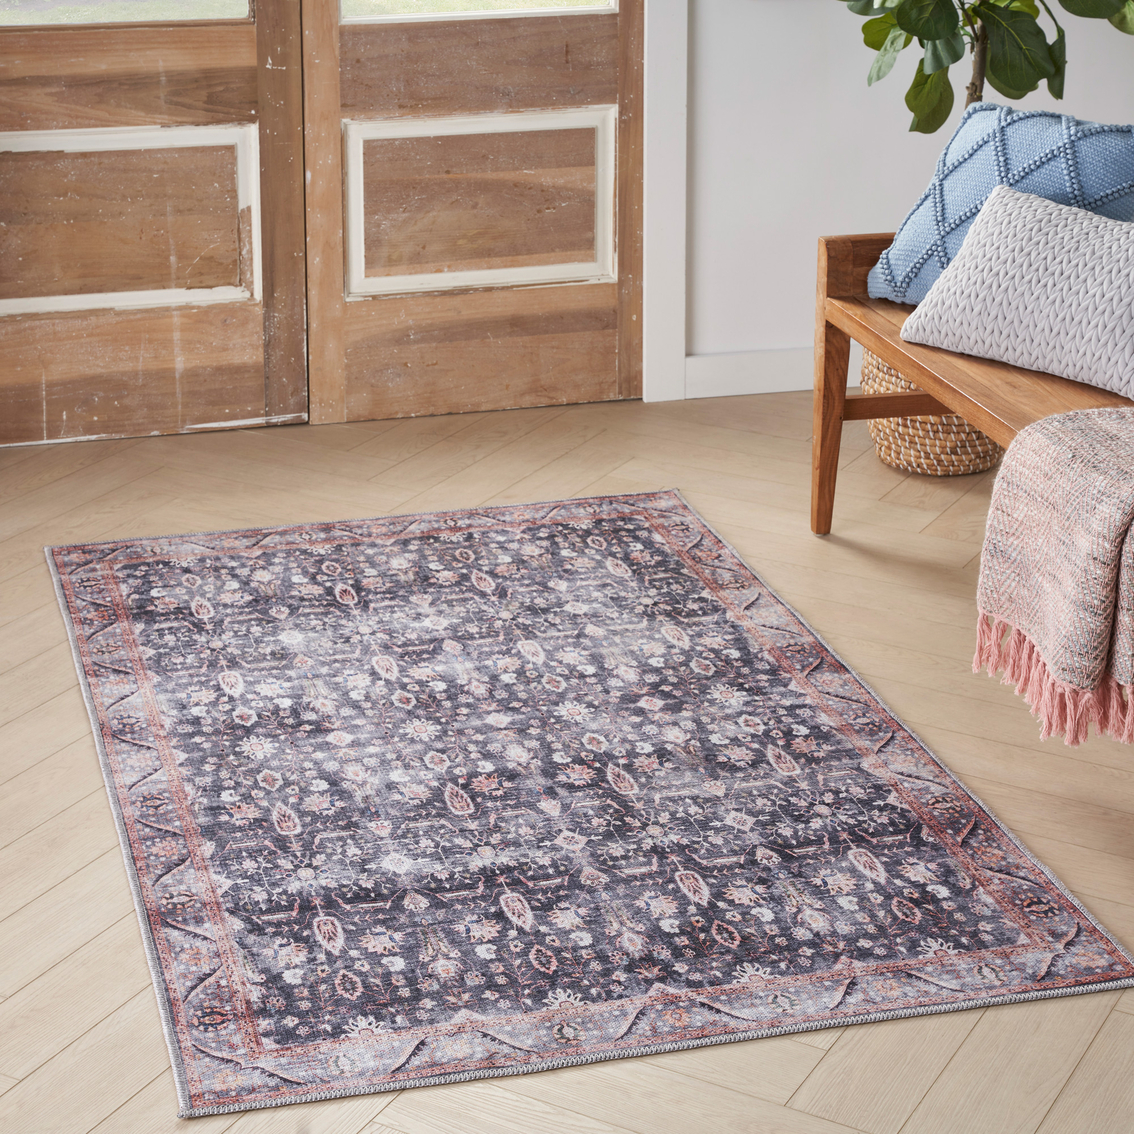 Nourison Grand Washables Persian Area Rug - Image 2 of 9